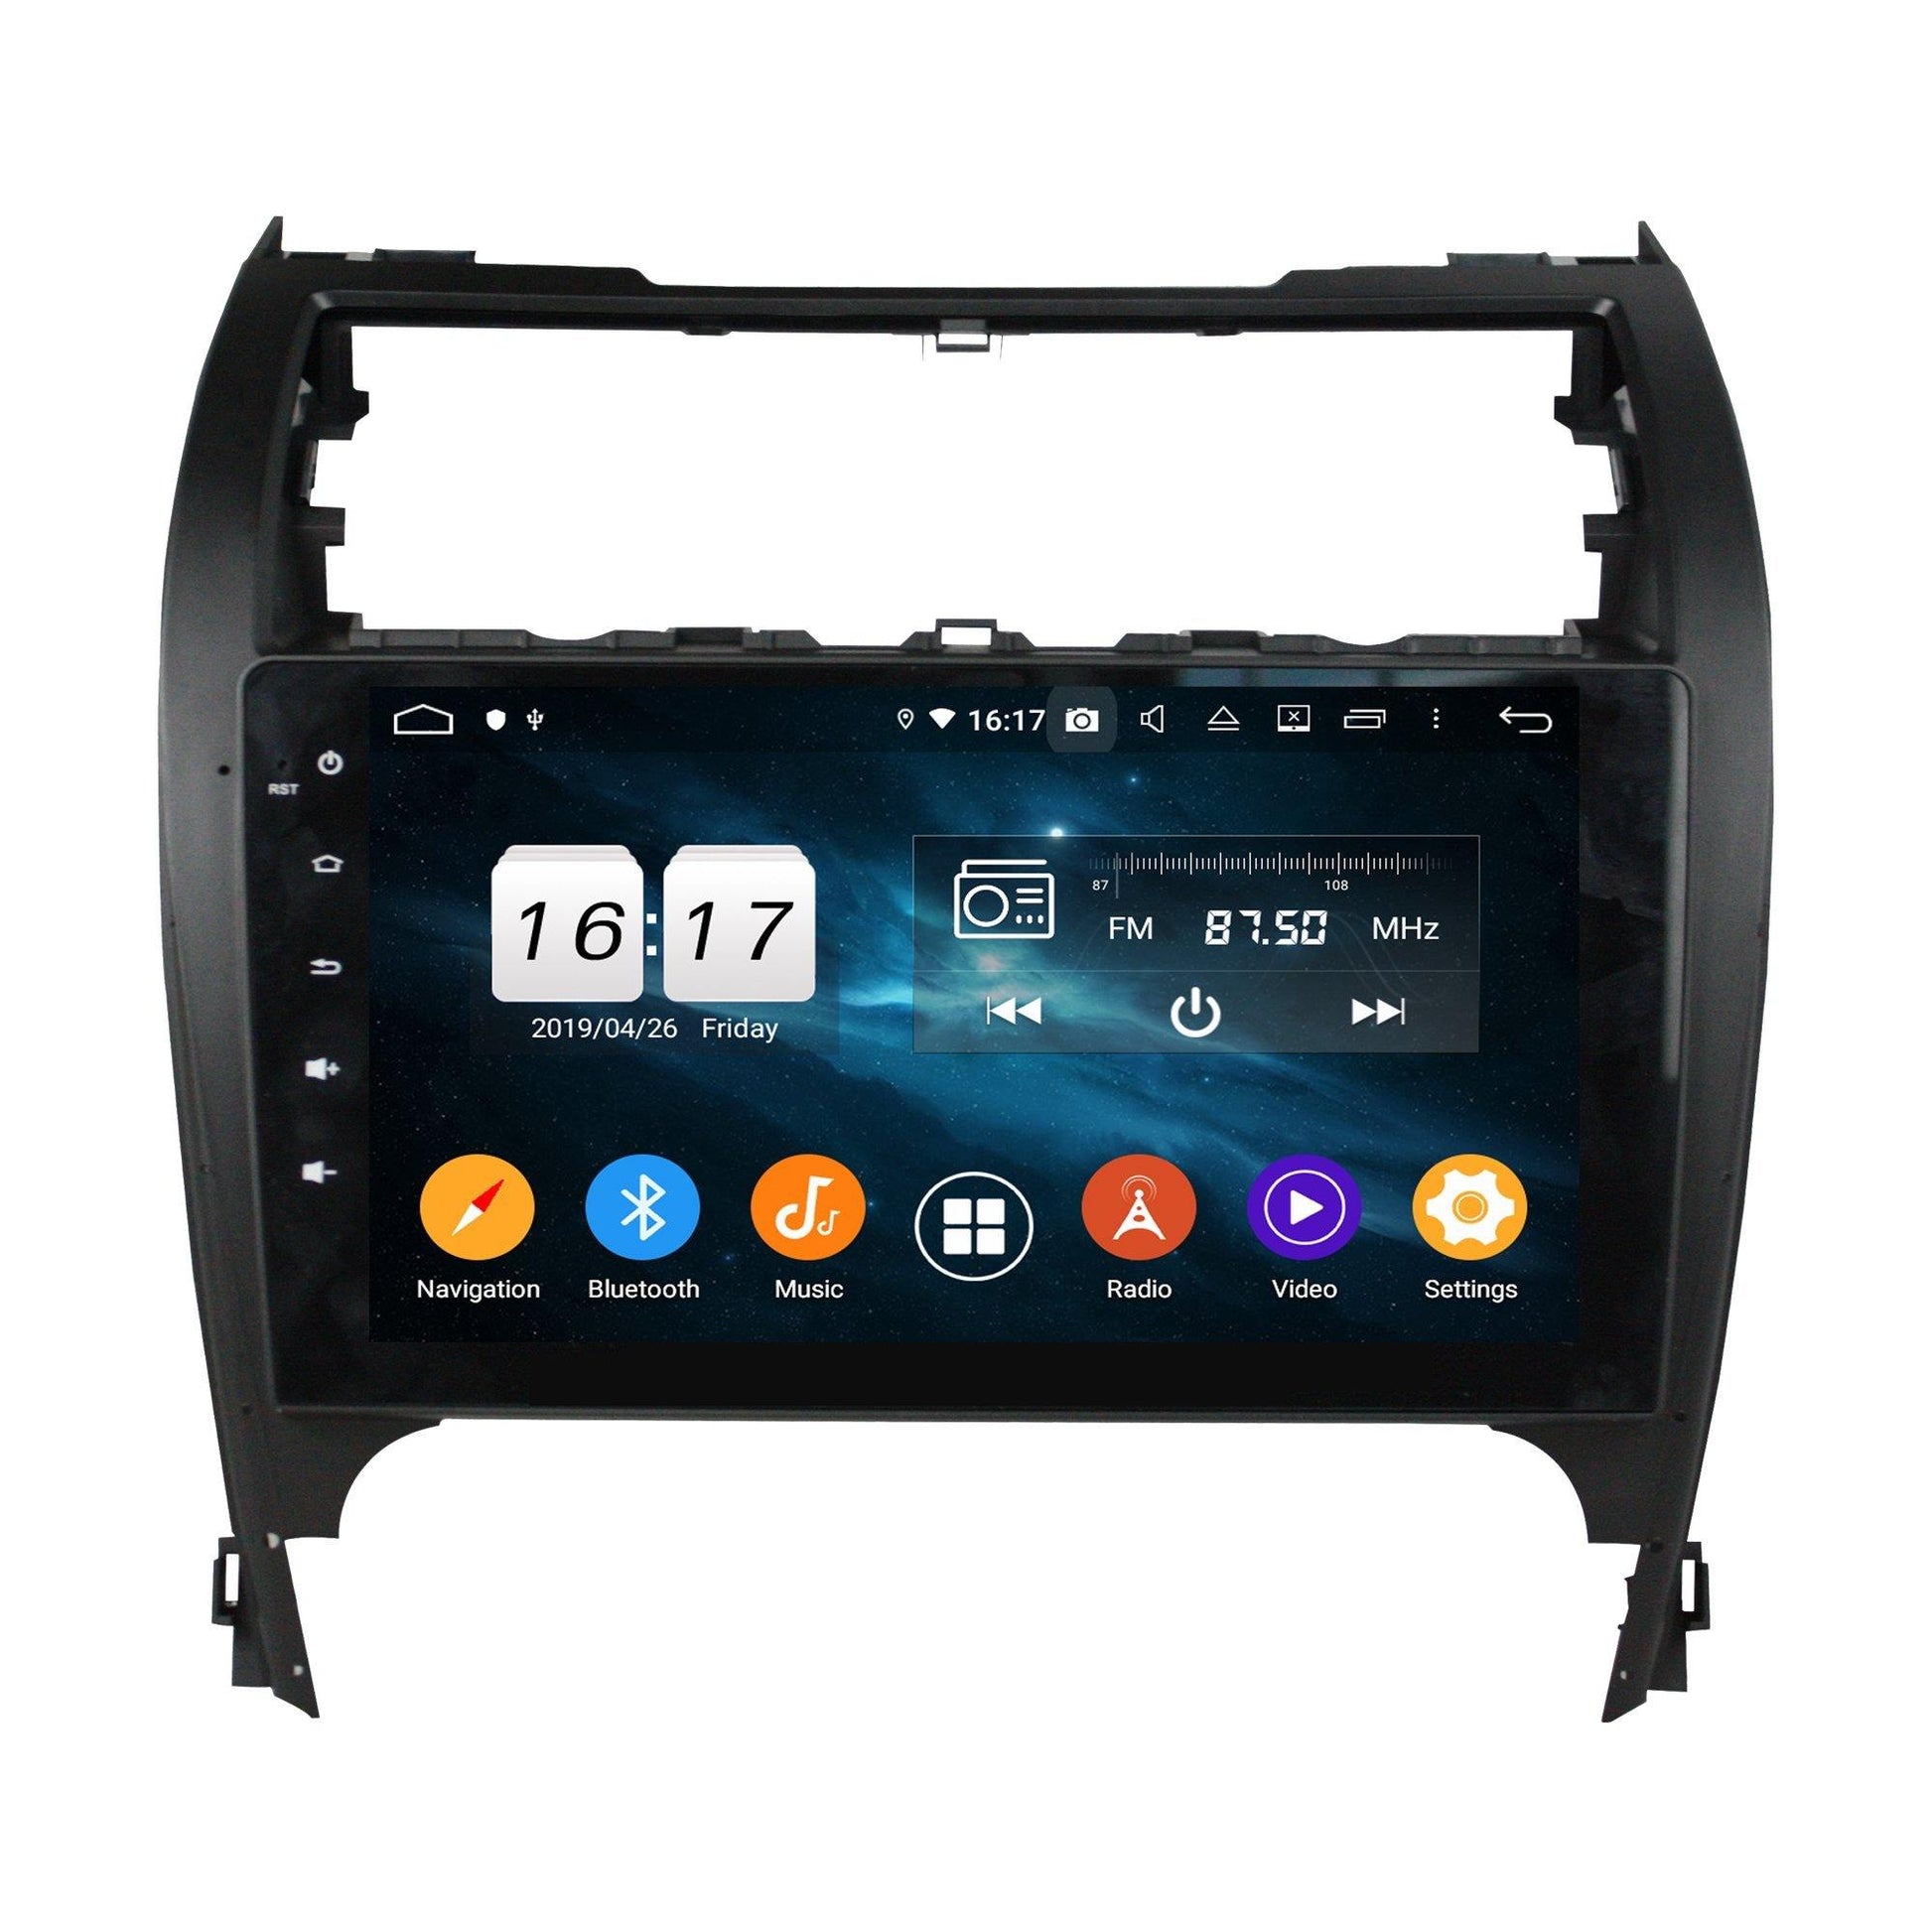 10.1" Octa-core Quad-core Android Navigation Radio for Toyota Camry 2012 - 2017 - Phoenix Android Radios